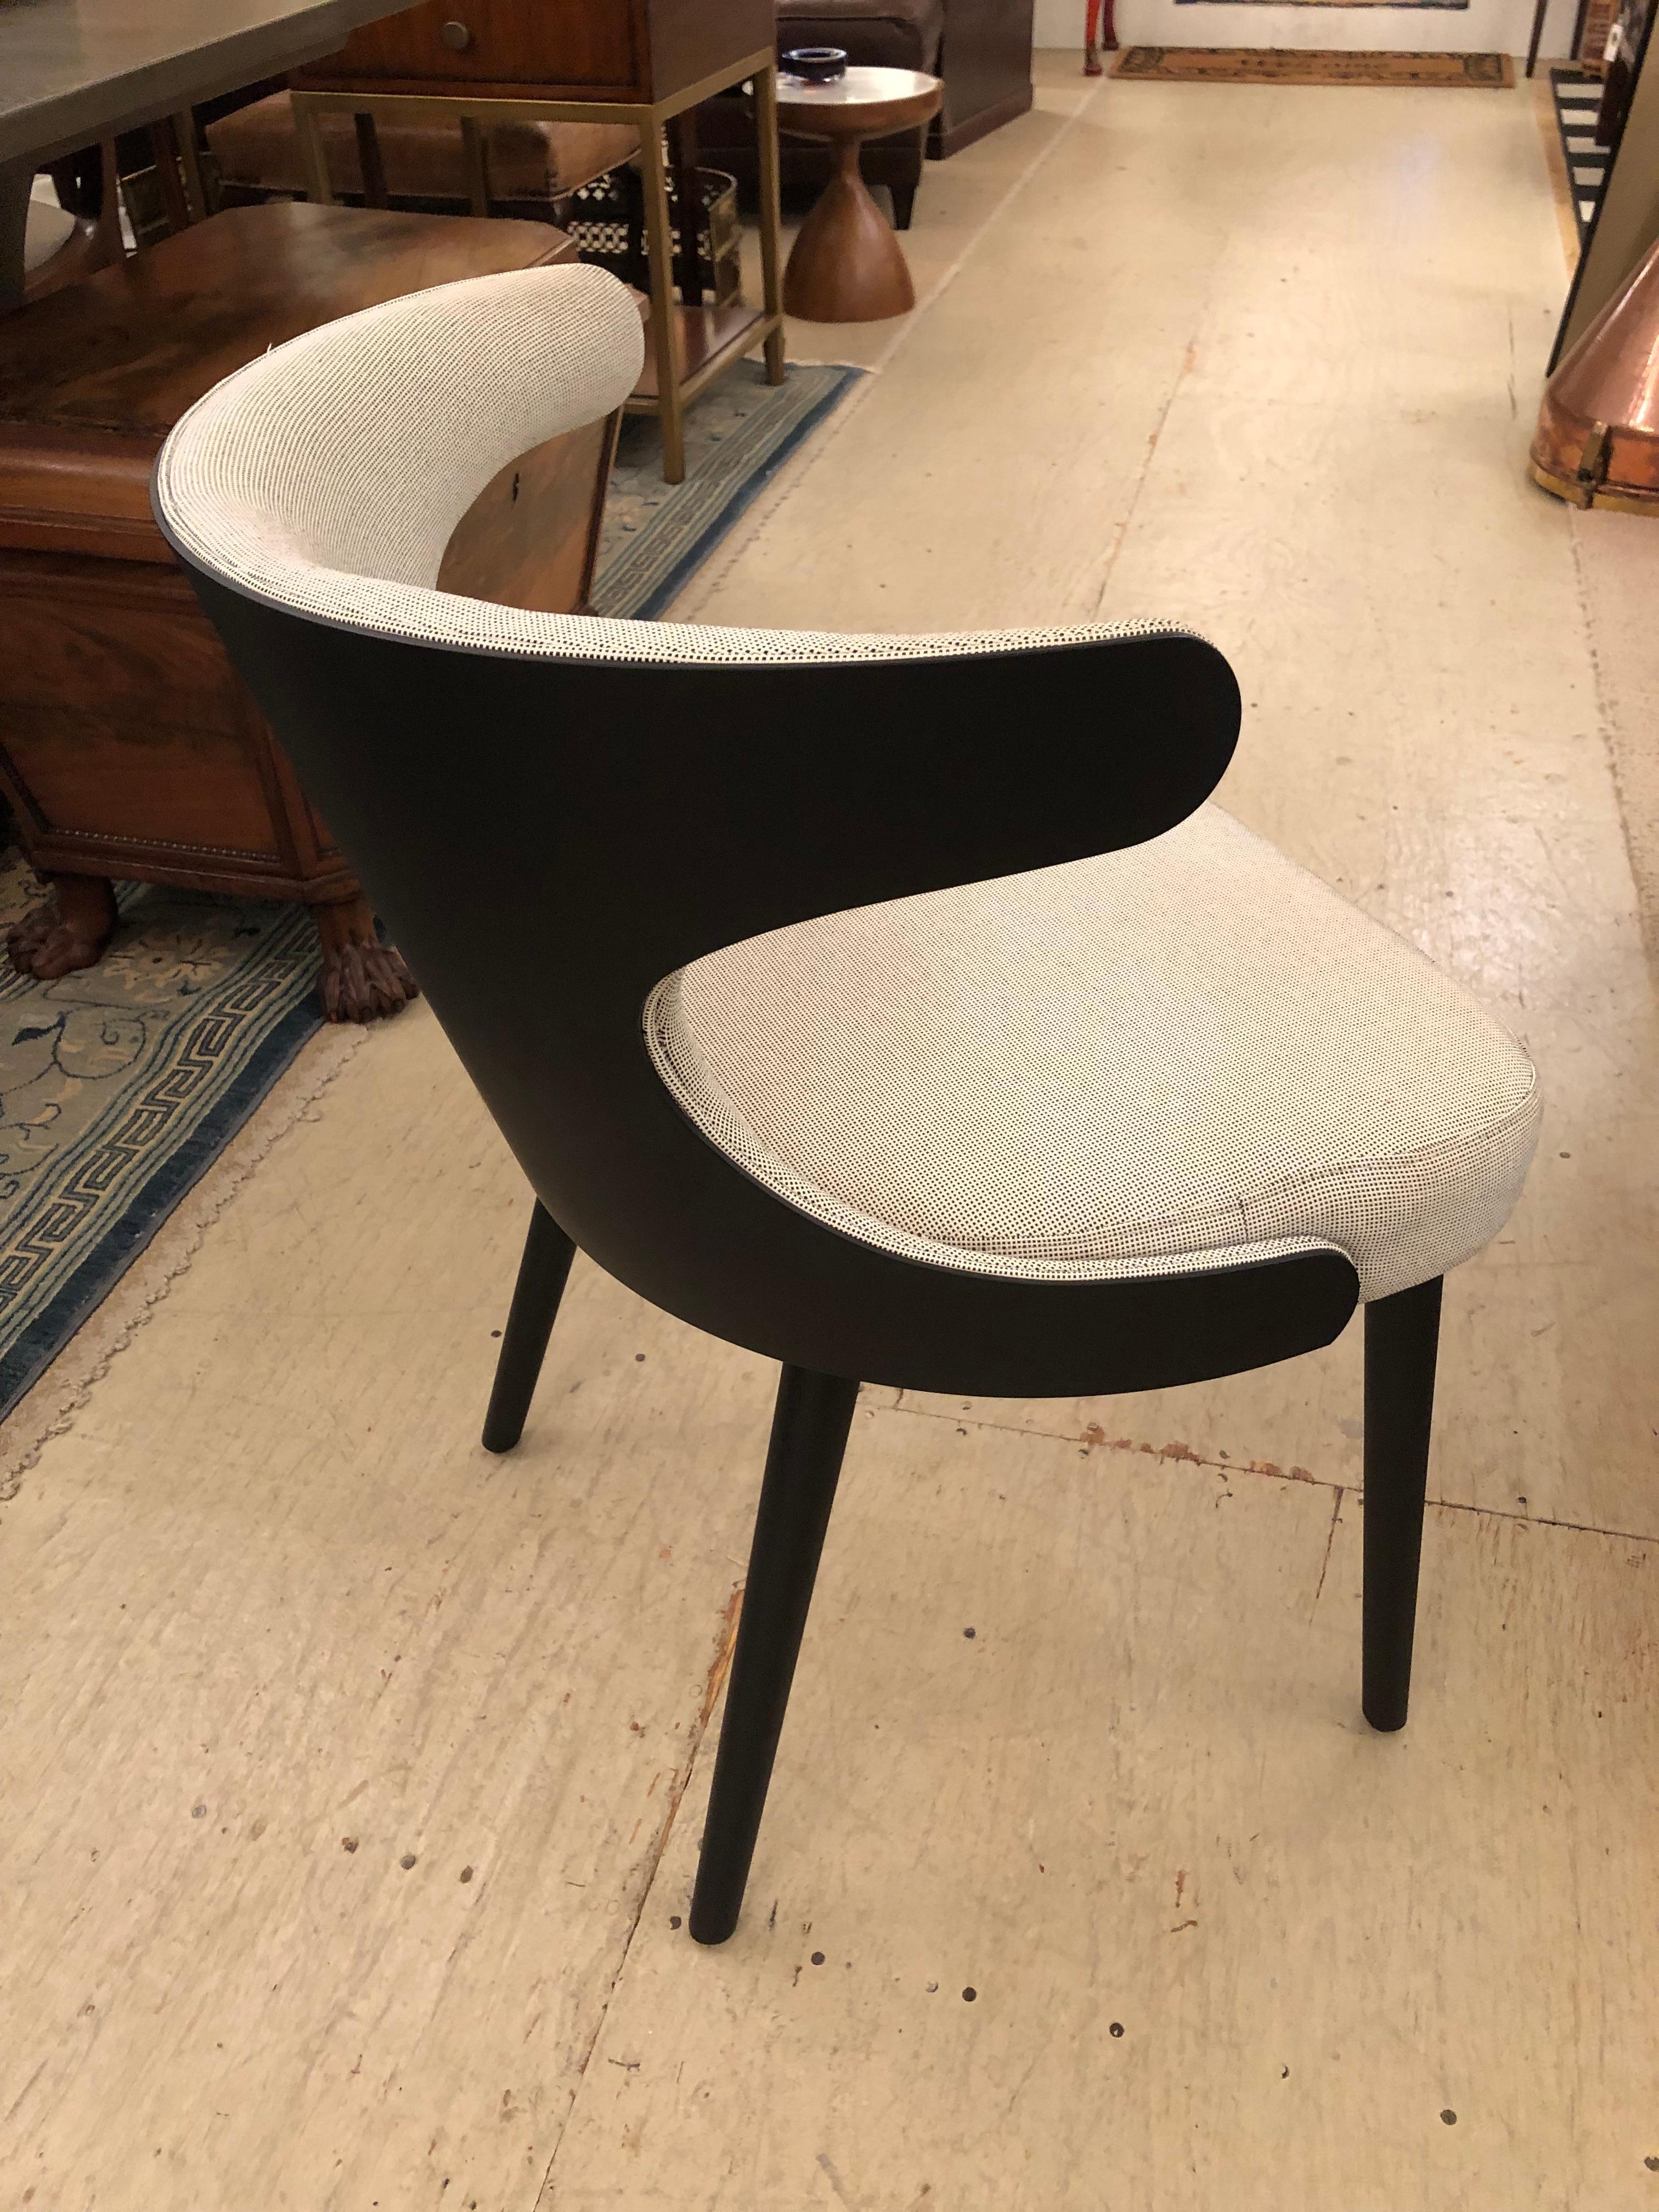 Upholstery Super Chic Sculptural Pair of Italian Chairs